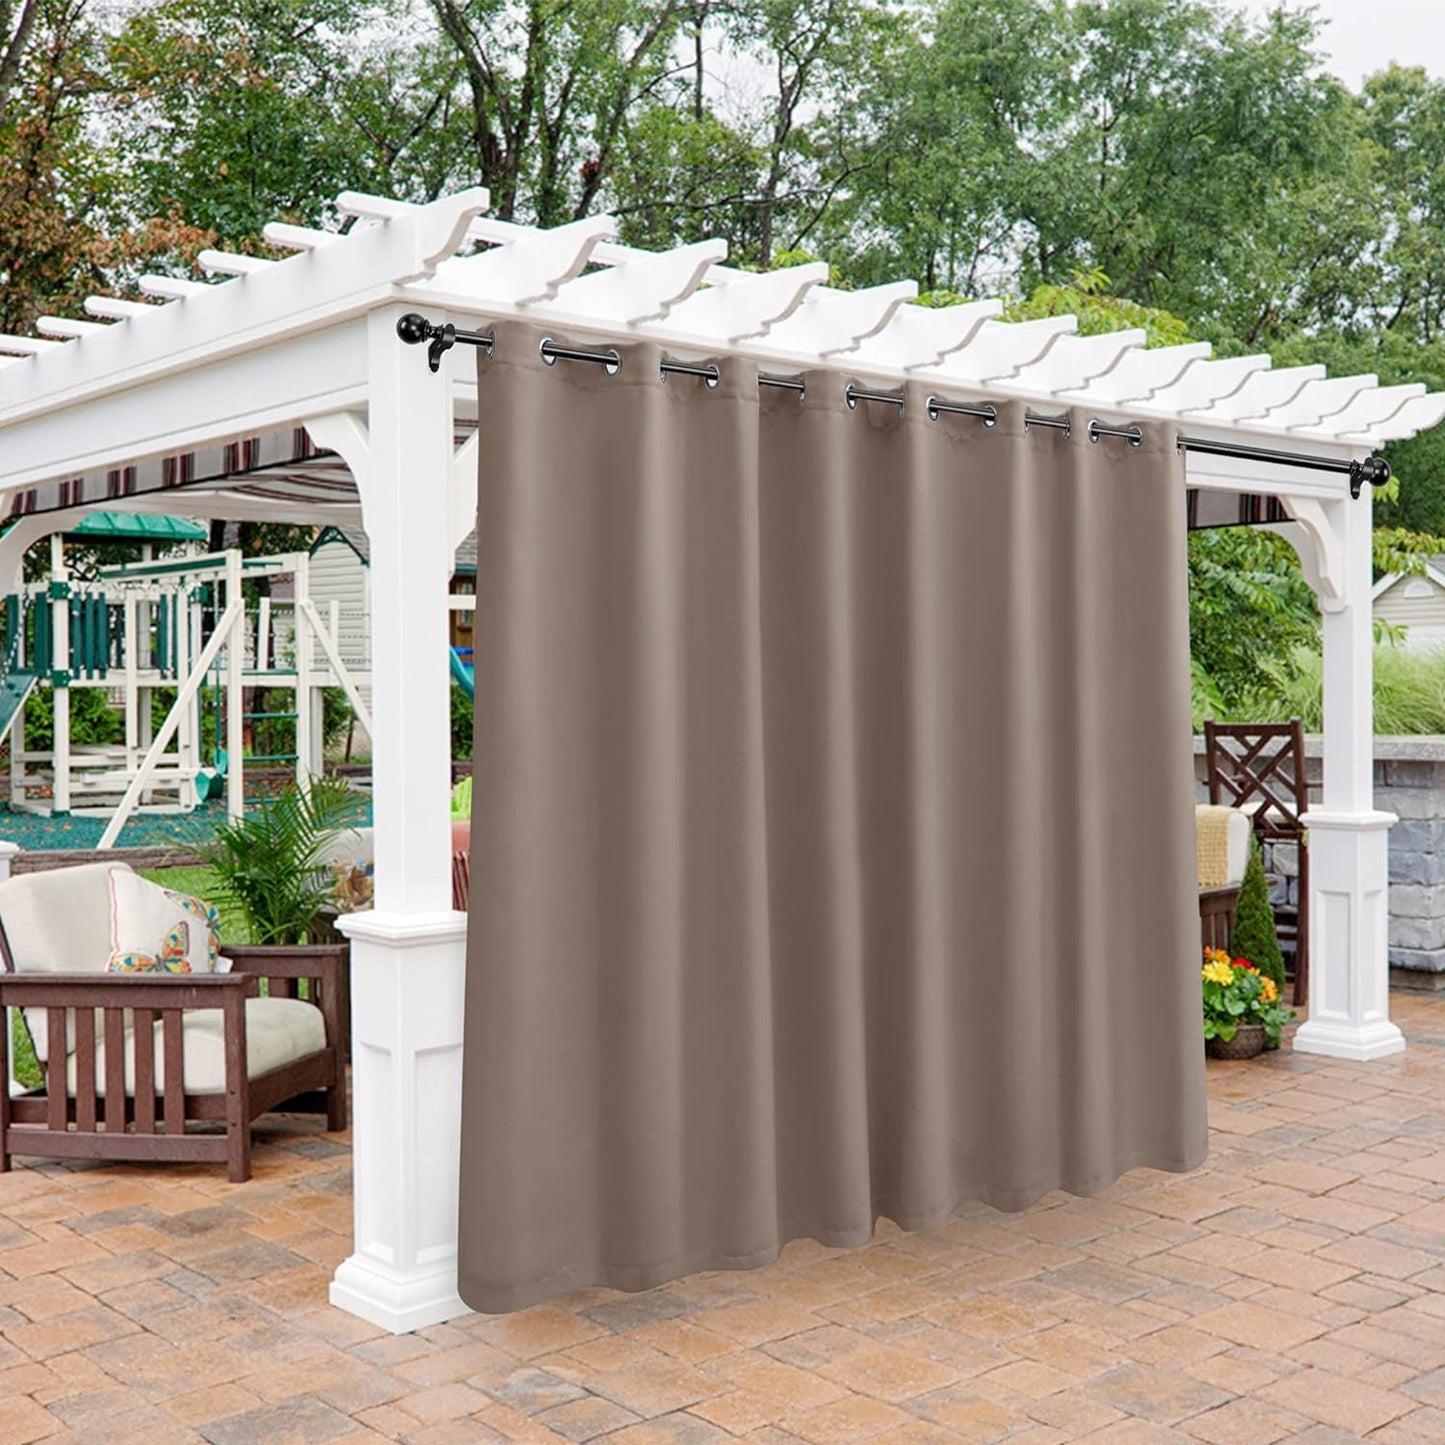 BONZER Outdoor Curtains for Patio Waterproof - Light Blocking Weather Resistant Privacy Grommet Blackout Curtains for Gazebo, Porch, Pergola, Cabana, Deck, Sunroom, 1 Panel, 52W X 84L Inch, Silver  BONZER Khaki 120W X 84 Inch 